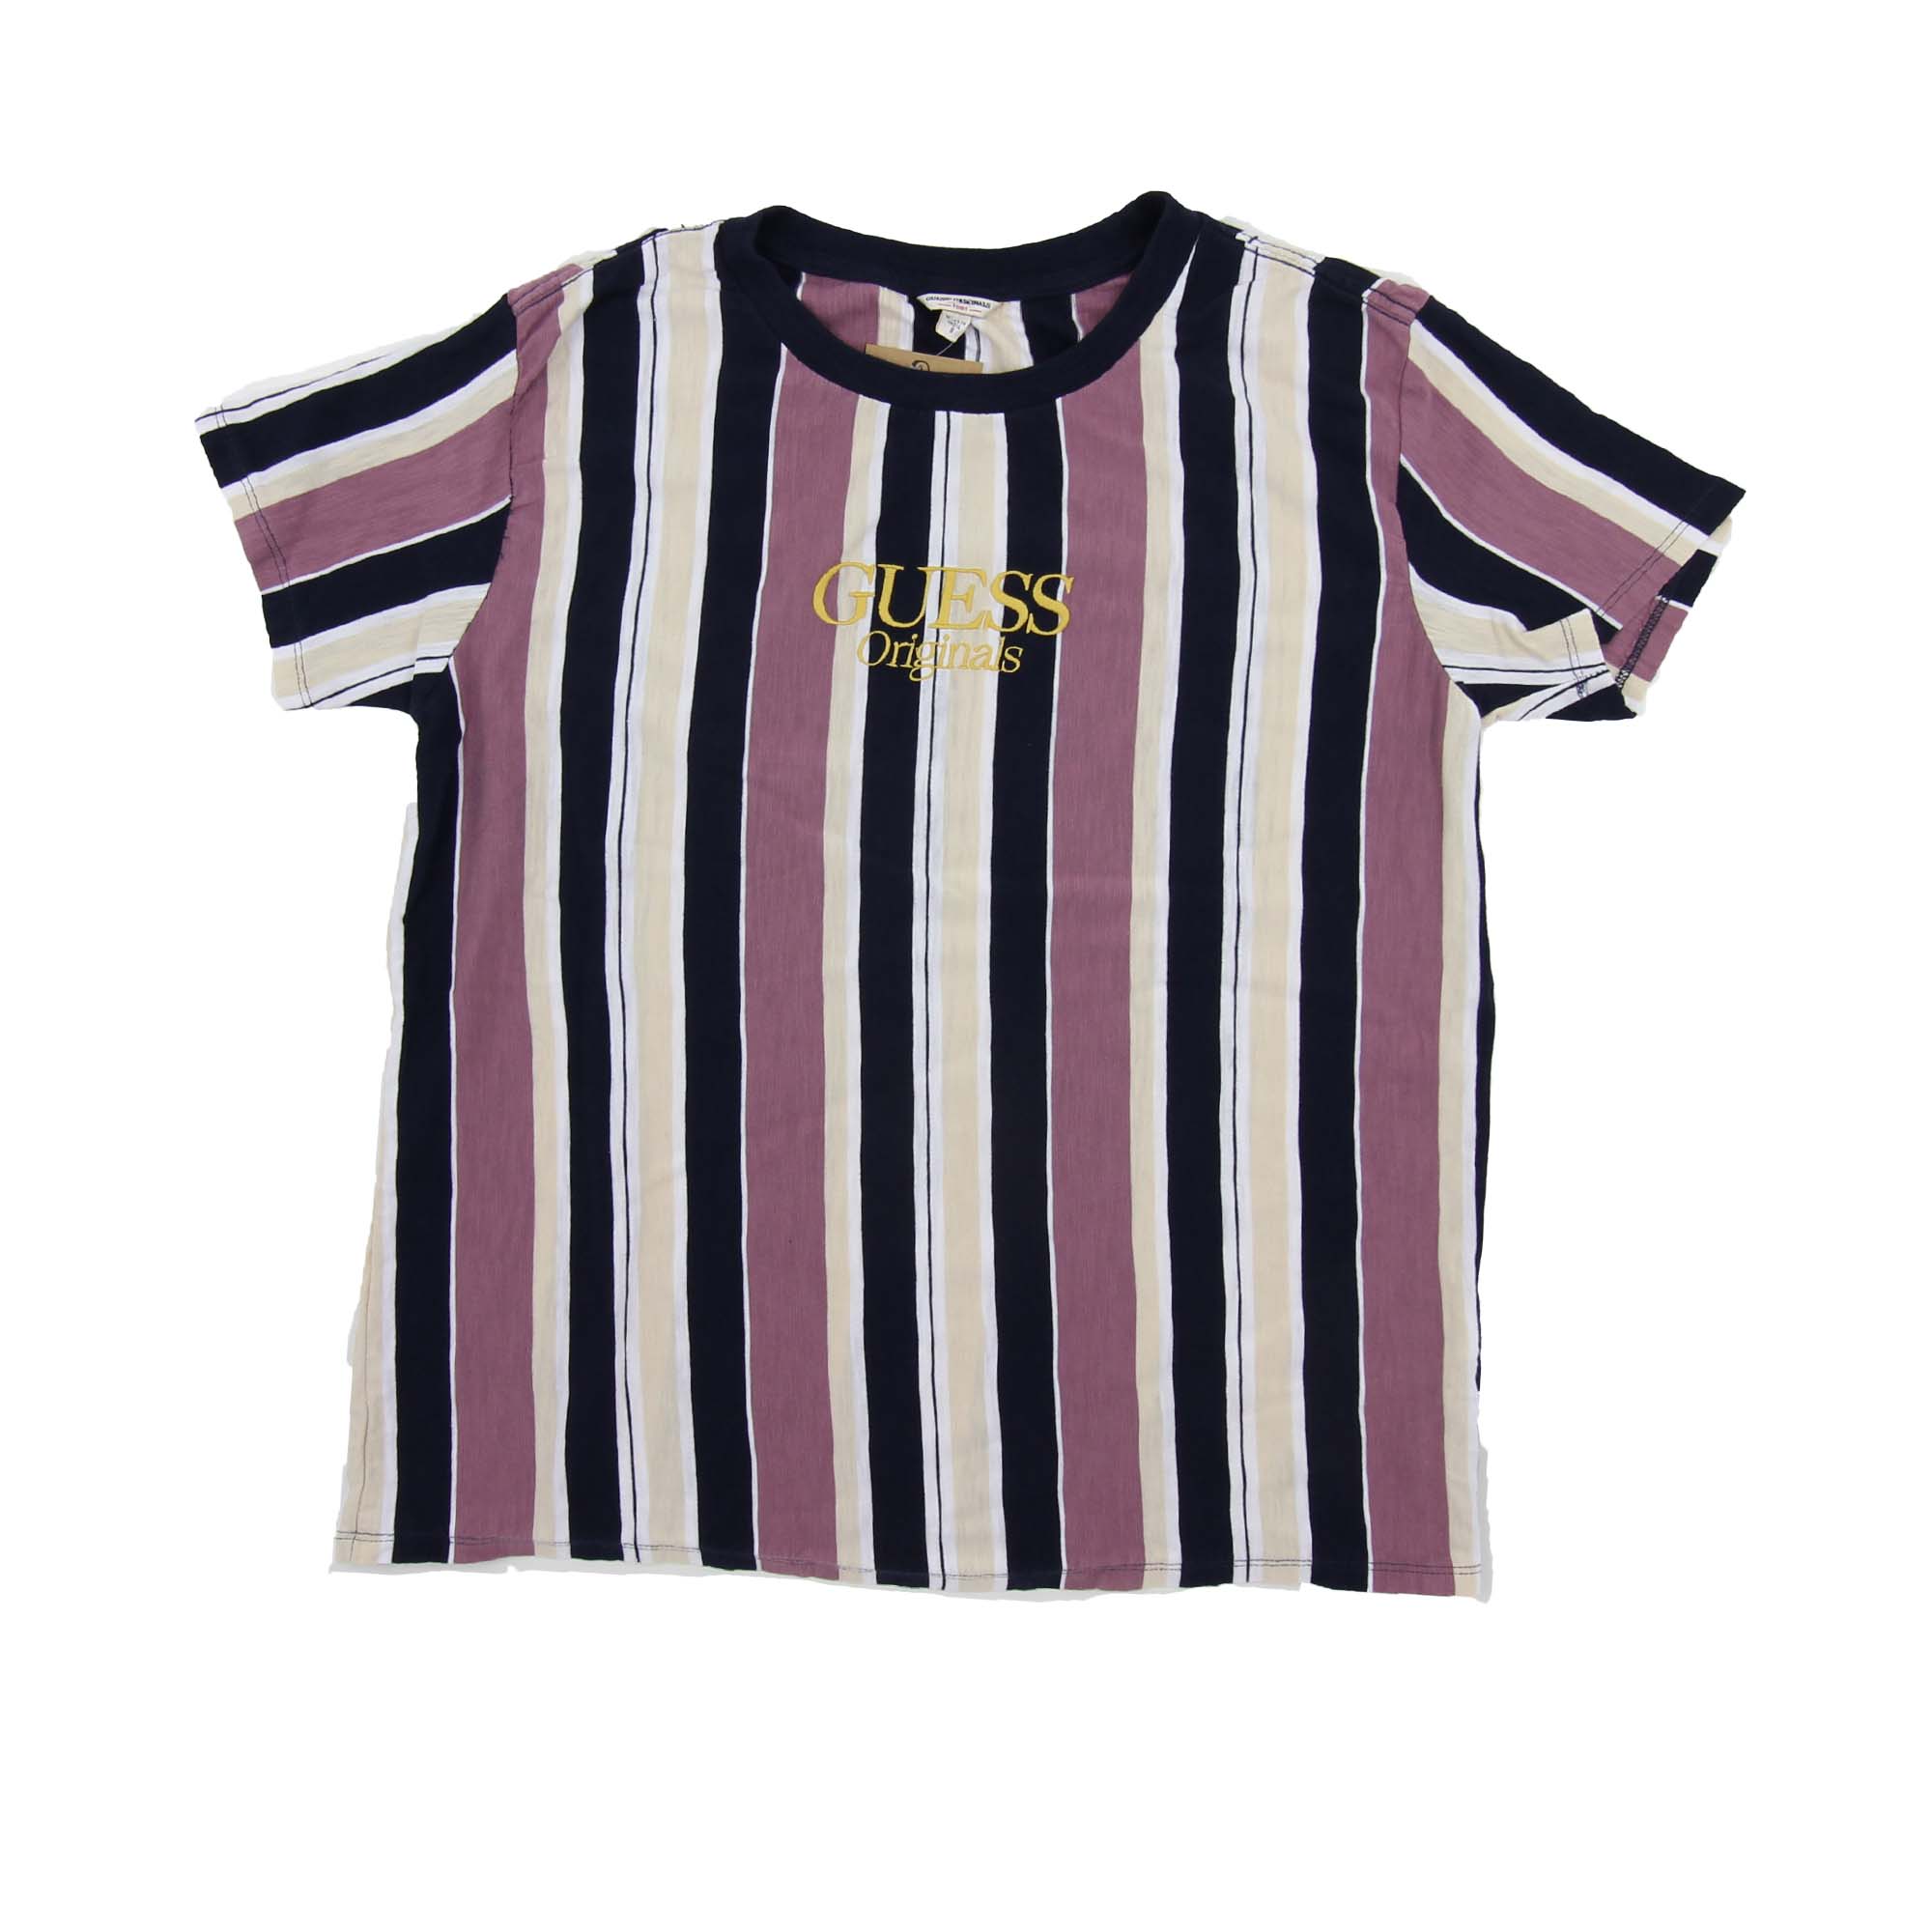 Guess Embroidered Logo T-Shirt - S